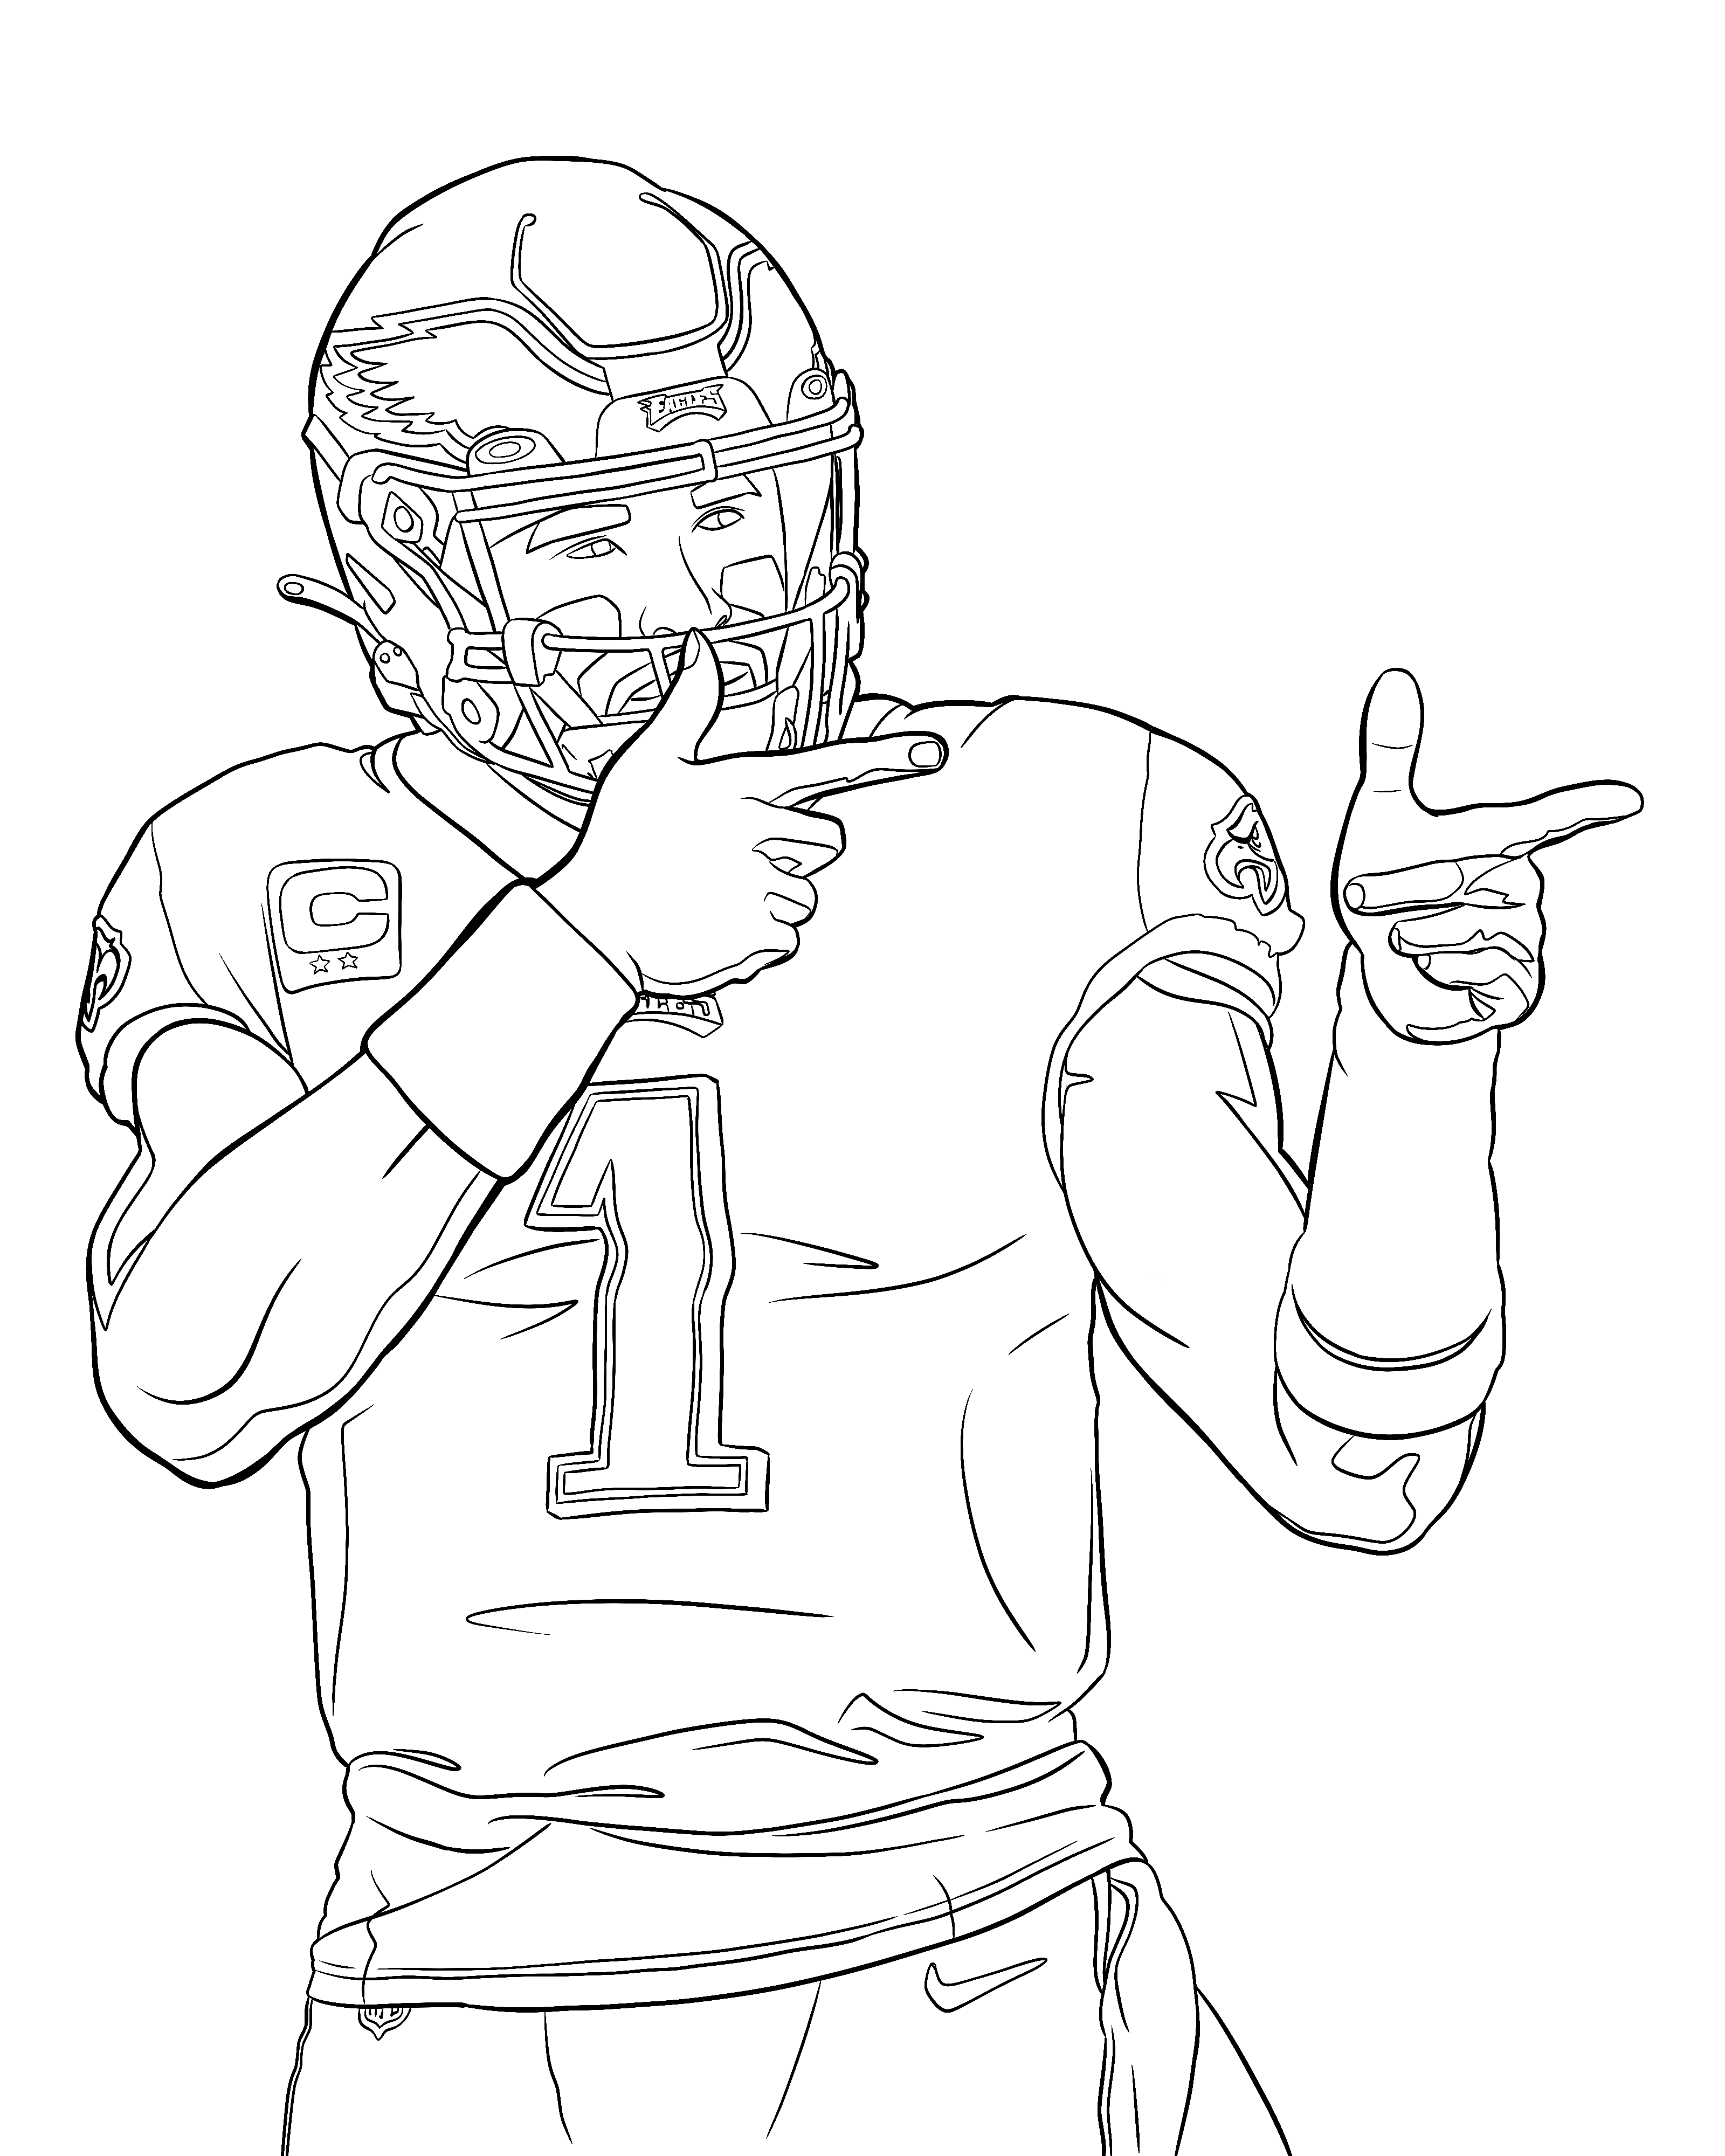 Philadelphia eagles on x who wants to color ps make sure to send us your finished pages ð flyeaglesfly httpstcoywujbcdb x